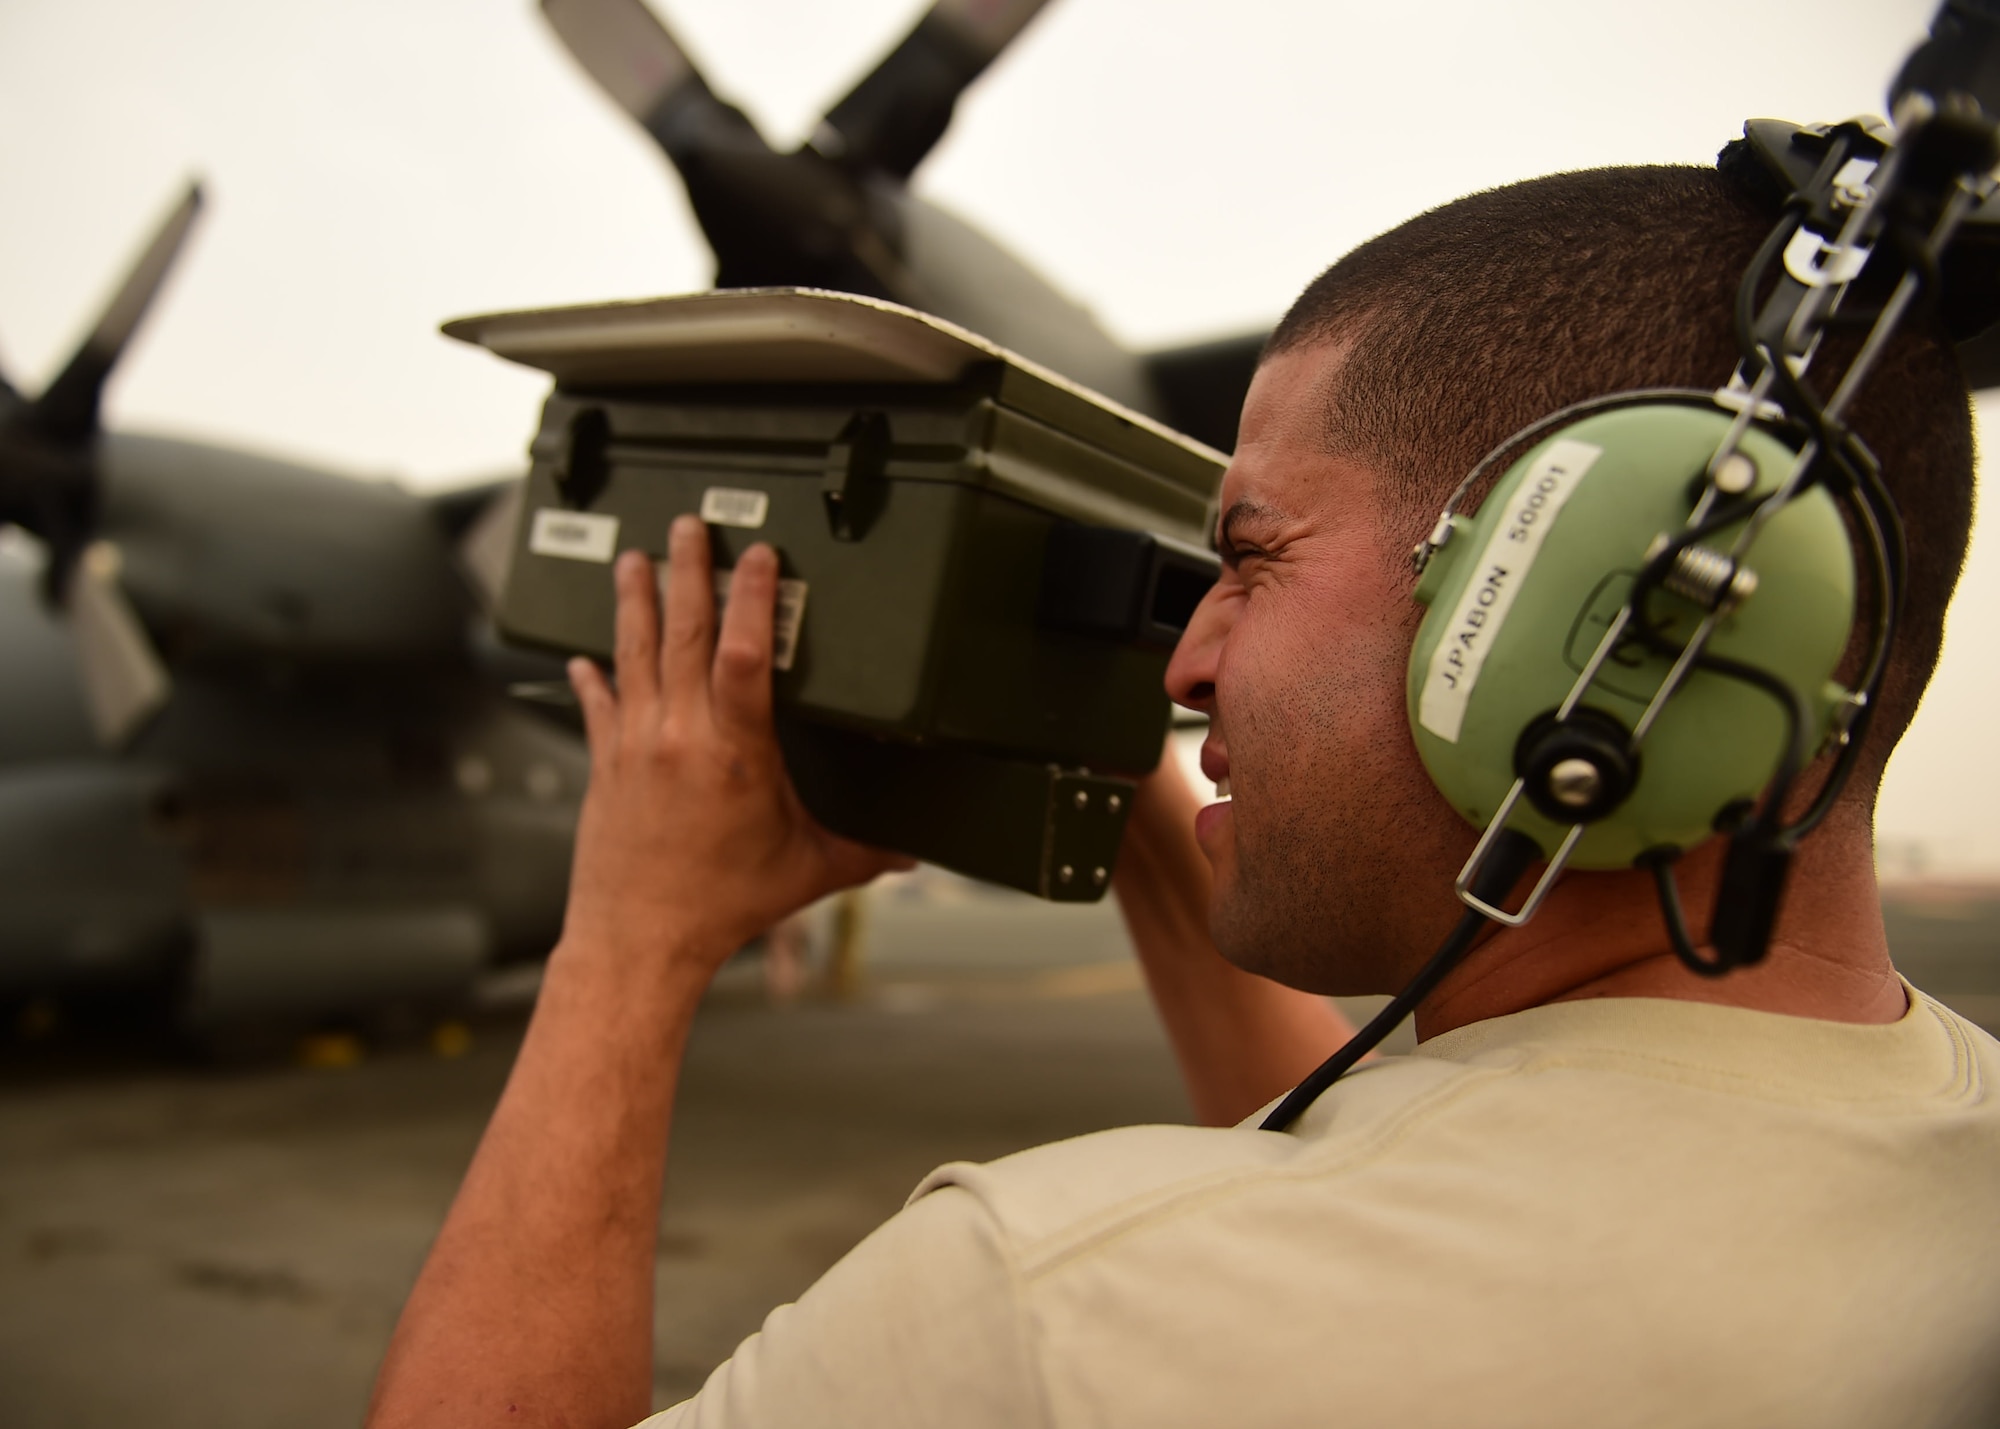 Tech. Sgt. Josue Pabon, 386th Expeditionary Aircraft Maintenance Squadron engine mechanic, conducts pre-flight checks prior to takeoff at an undisclosed location in Southwest Asia, Oct. 29, 2015. Pabon and the rest of the maintenance crew ensure the aircraft is mechanically sound for the duration of the mission. (U.S. Air Force photo by Staff Sgt. Jerilyn Quintanilla)  